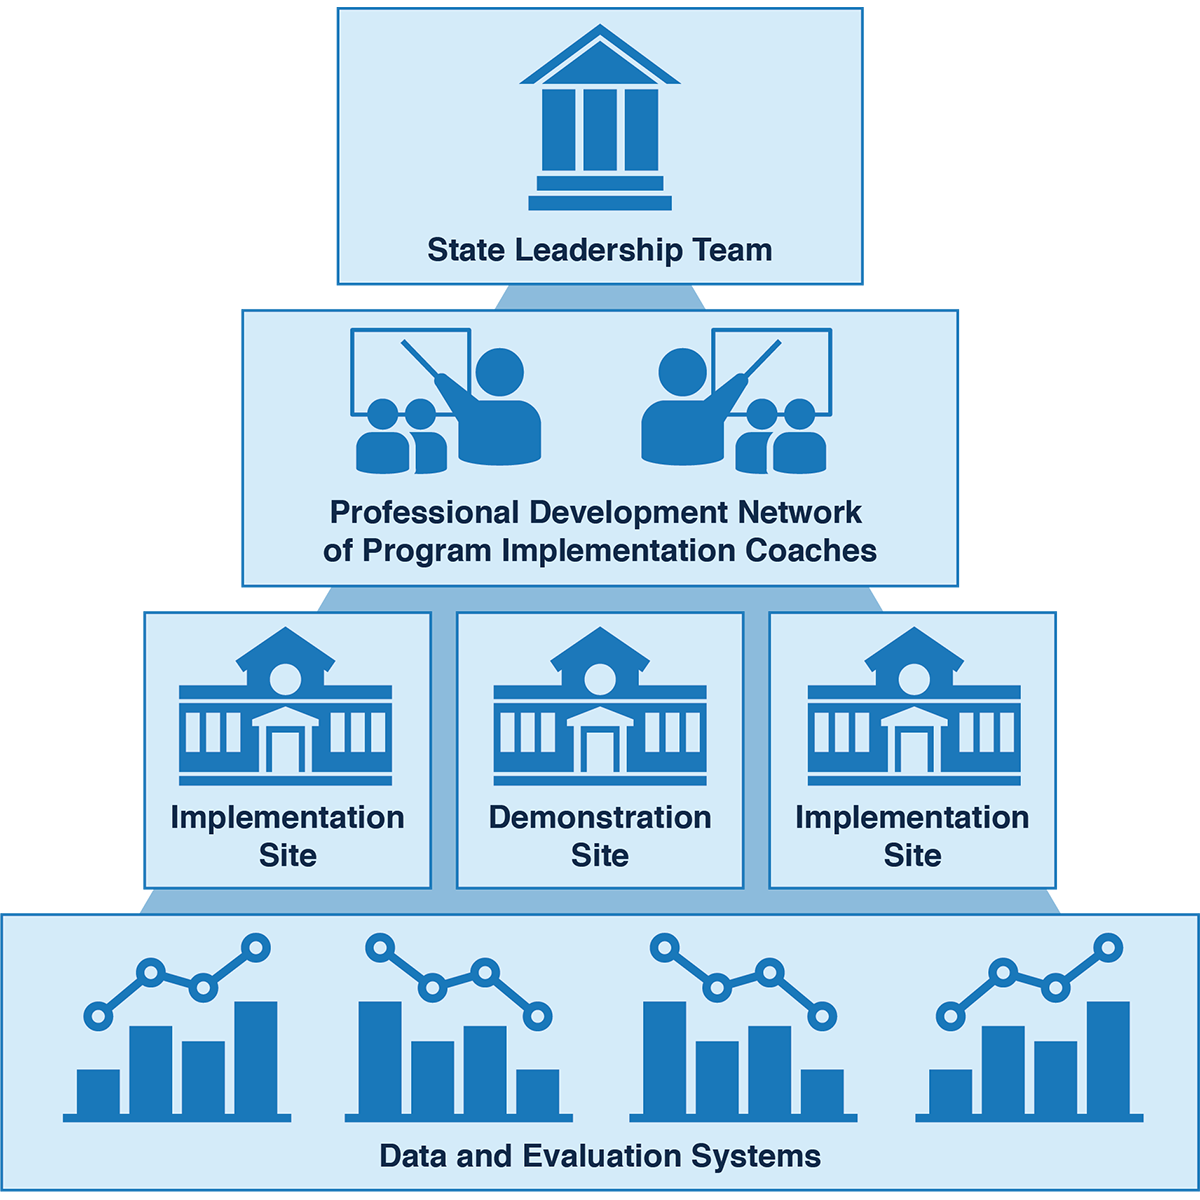 Figure: State Leadership Team, Professional Development Network of of Program Implementation Coaches, Implementation Sites, and Data and Evaluation Systems